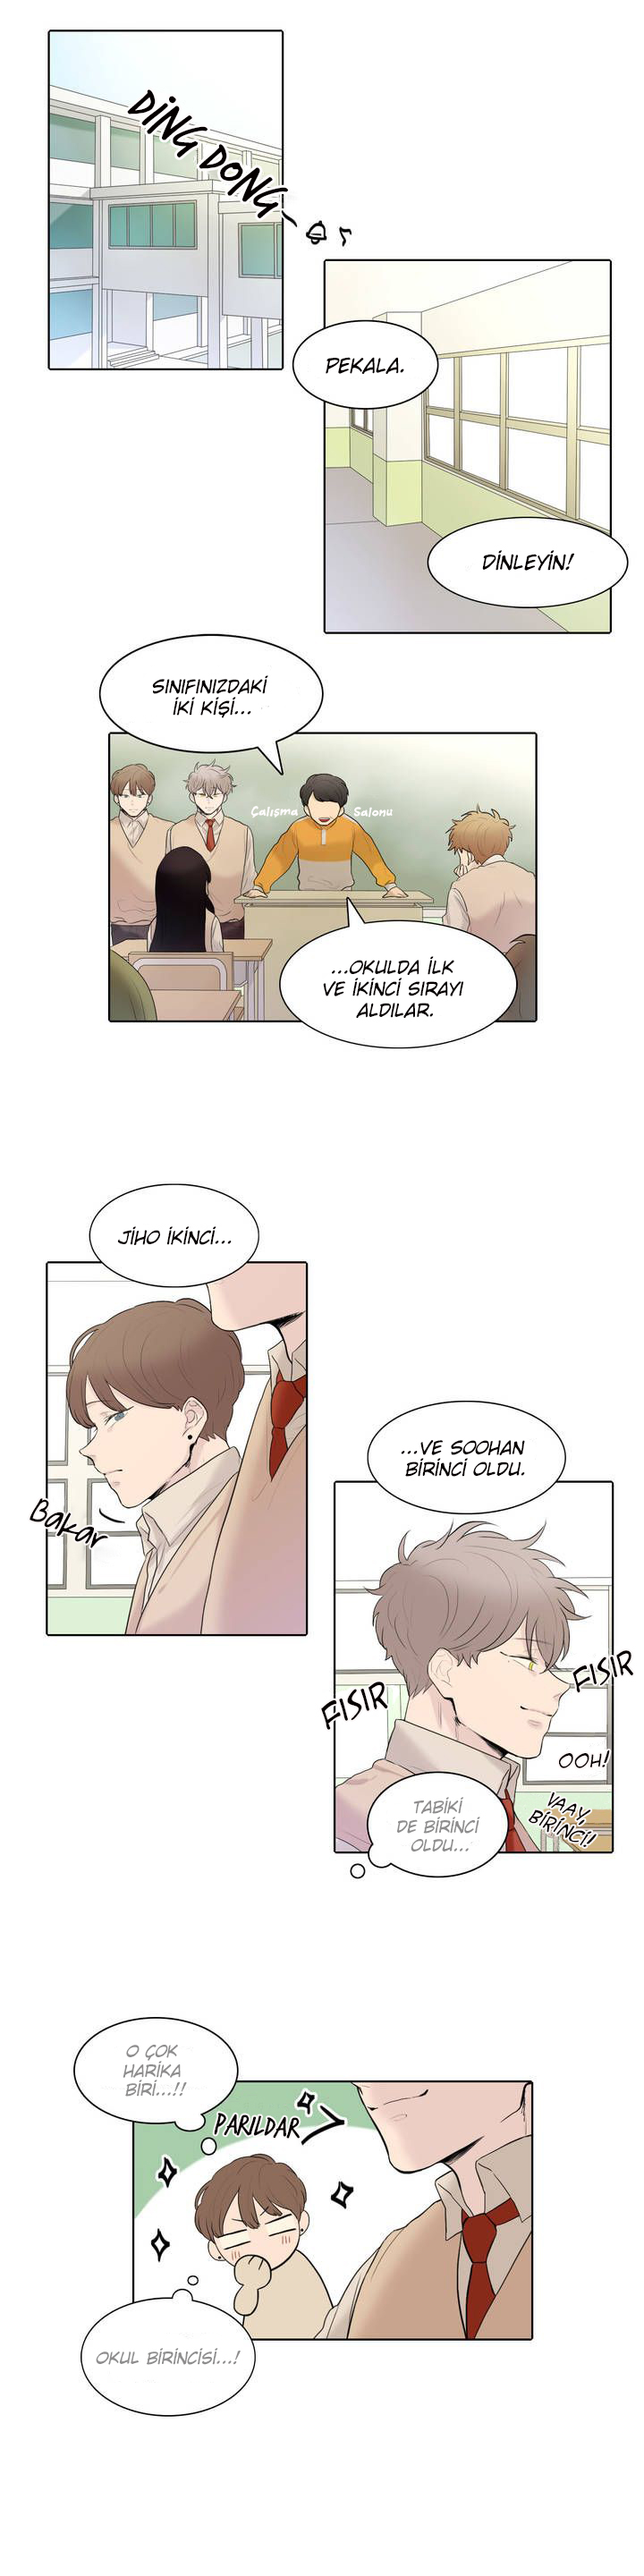 Voice of Love: Chapter 03 - Page 3